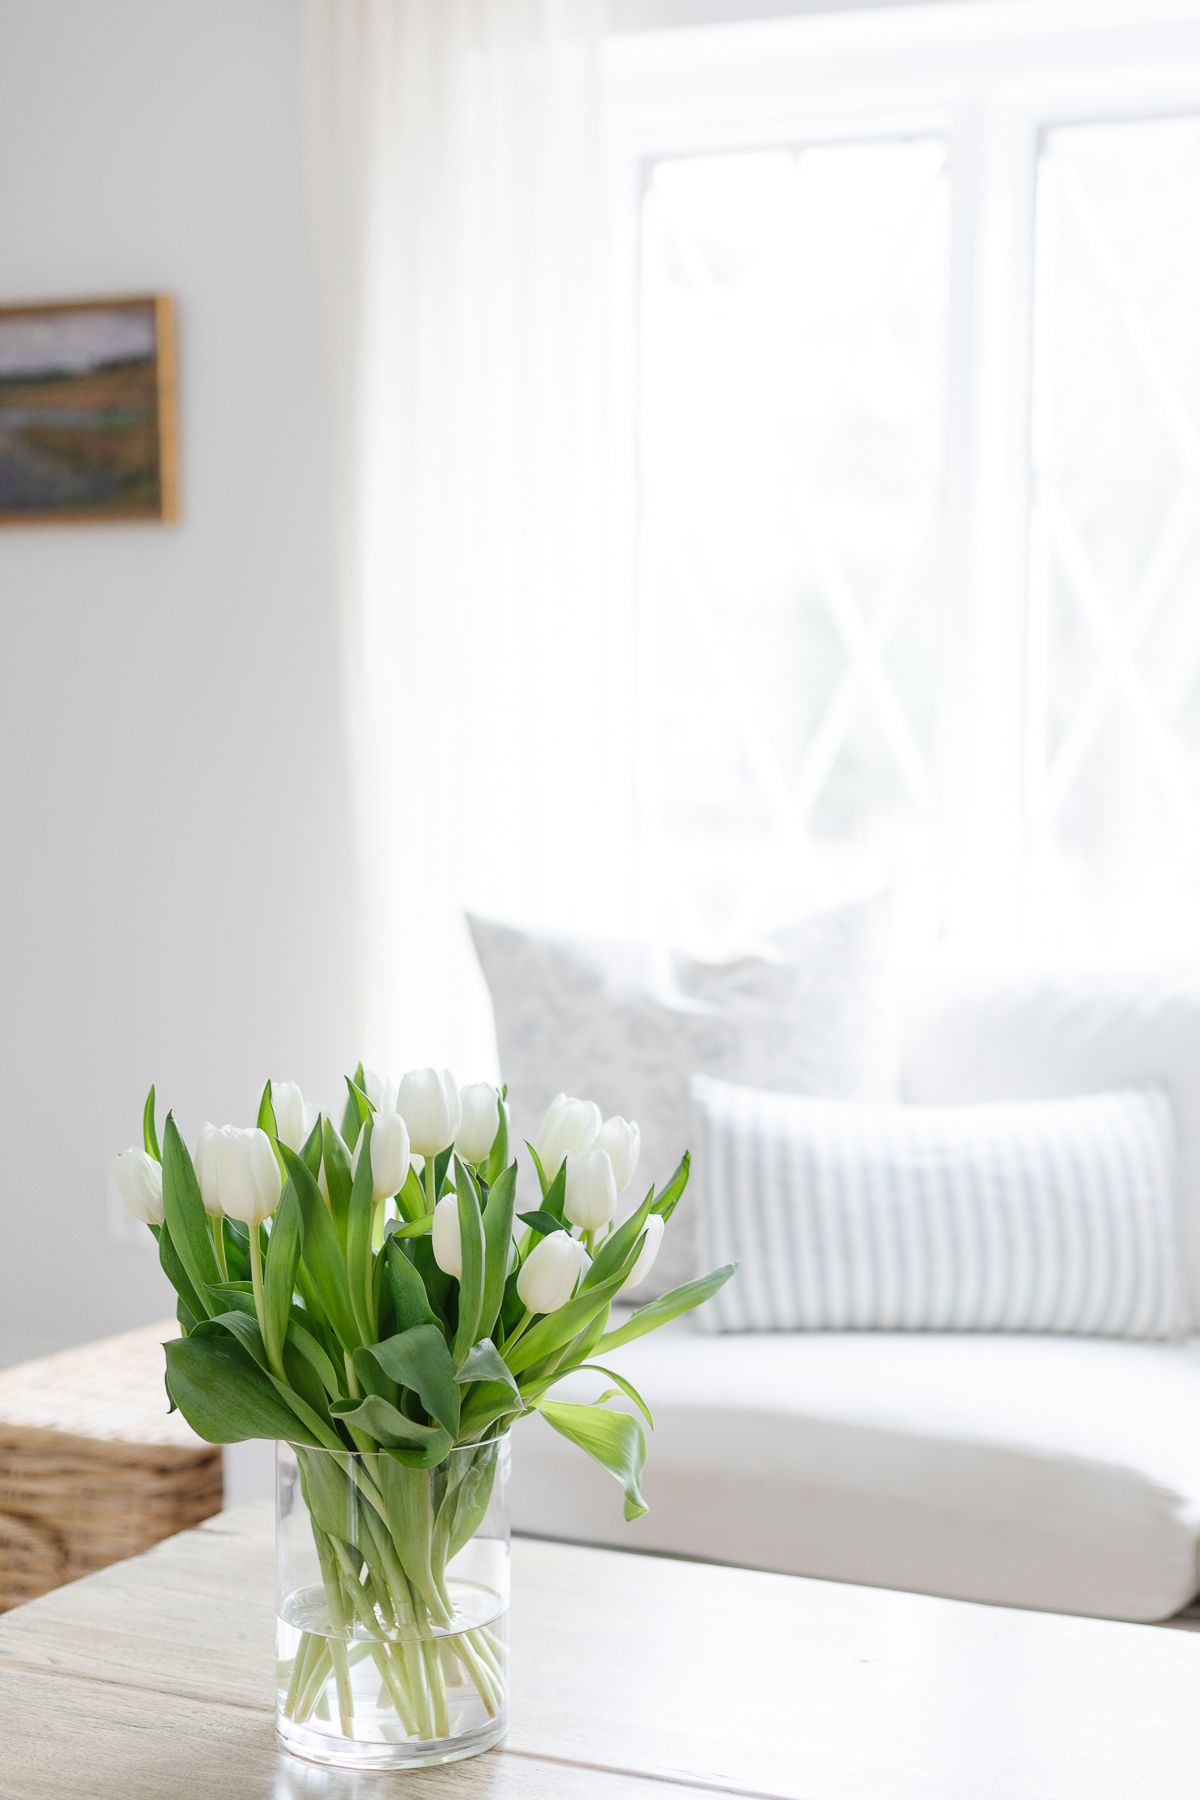 A vase of white tulips on a wooden coffee table.